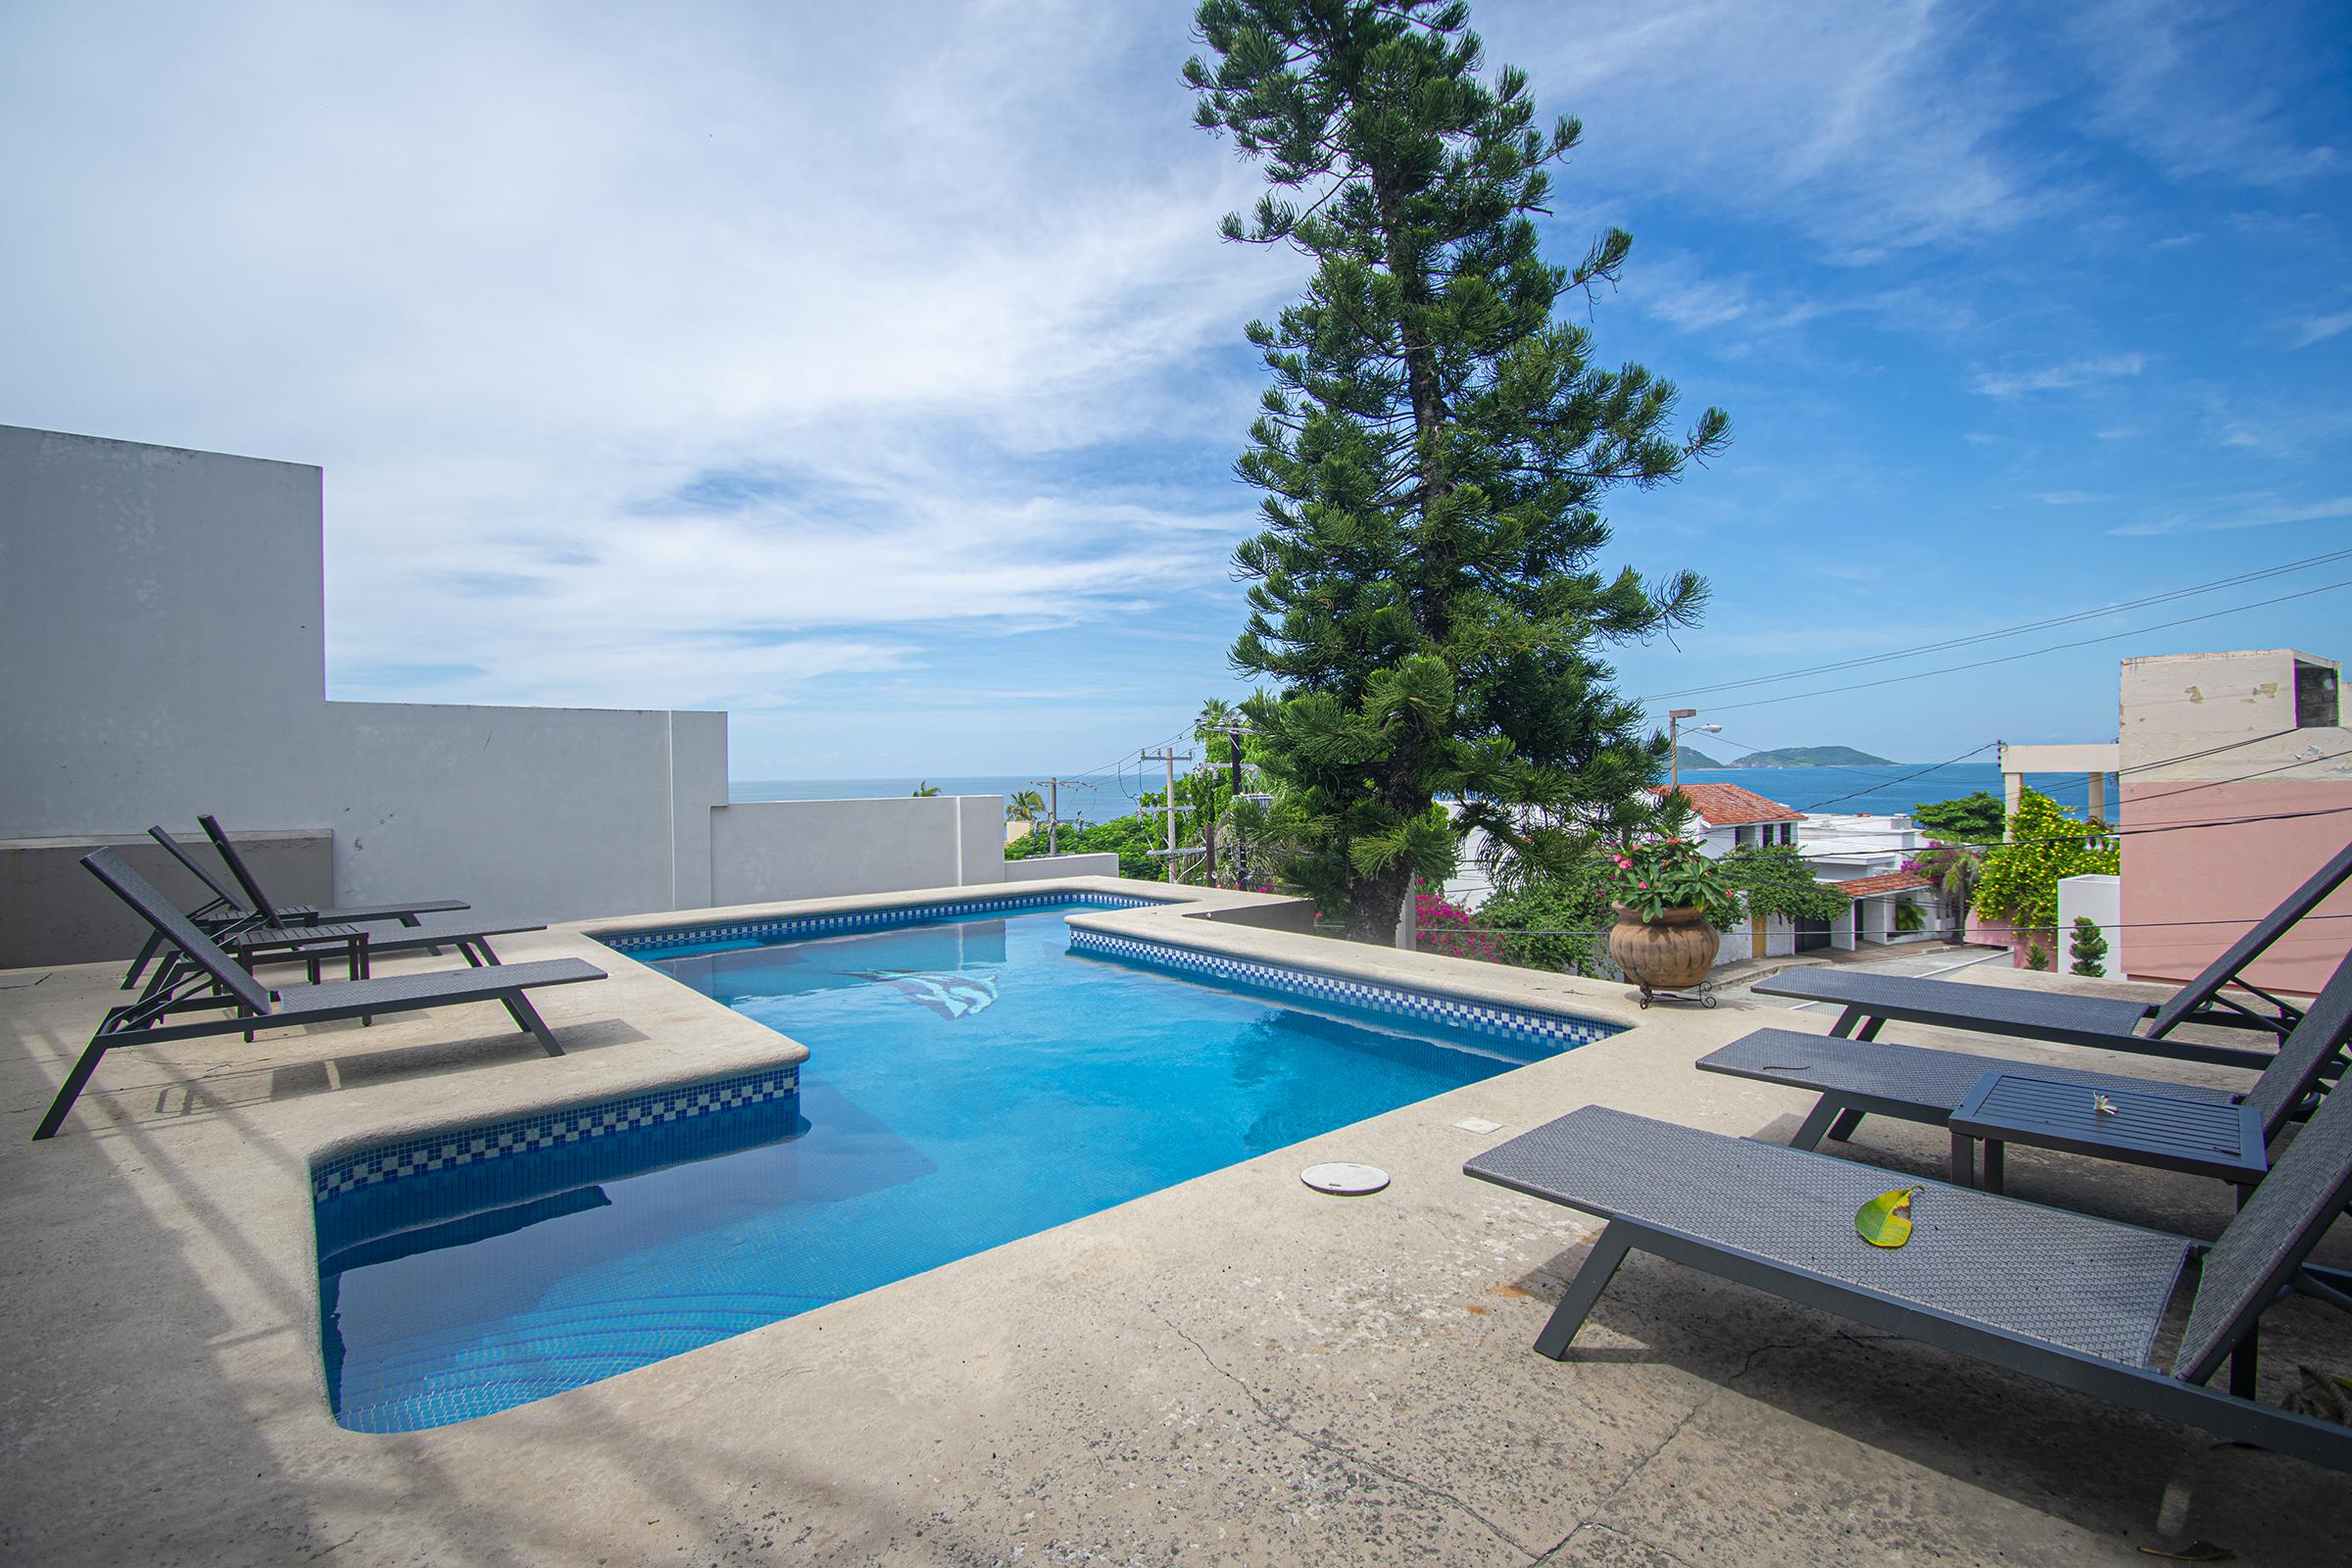 Property Image 2 - Sandy Dreams Casita with Pool and AMAZING Sunset Views